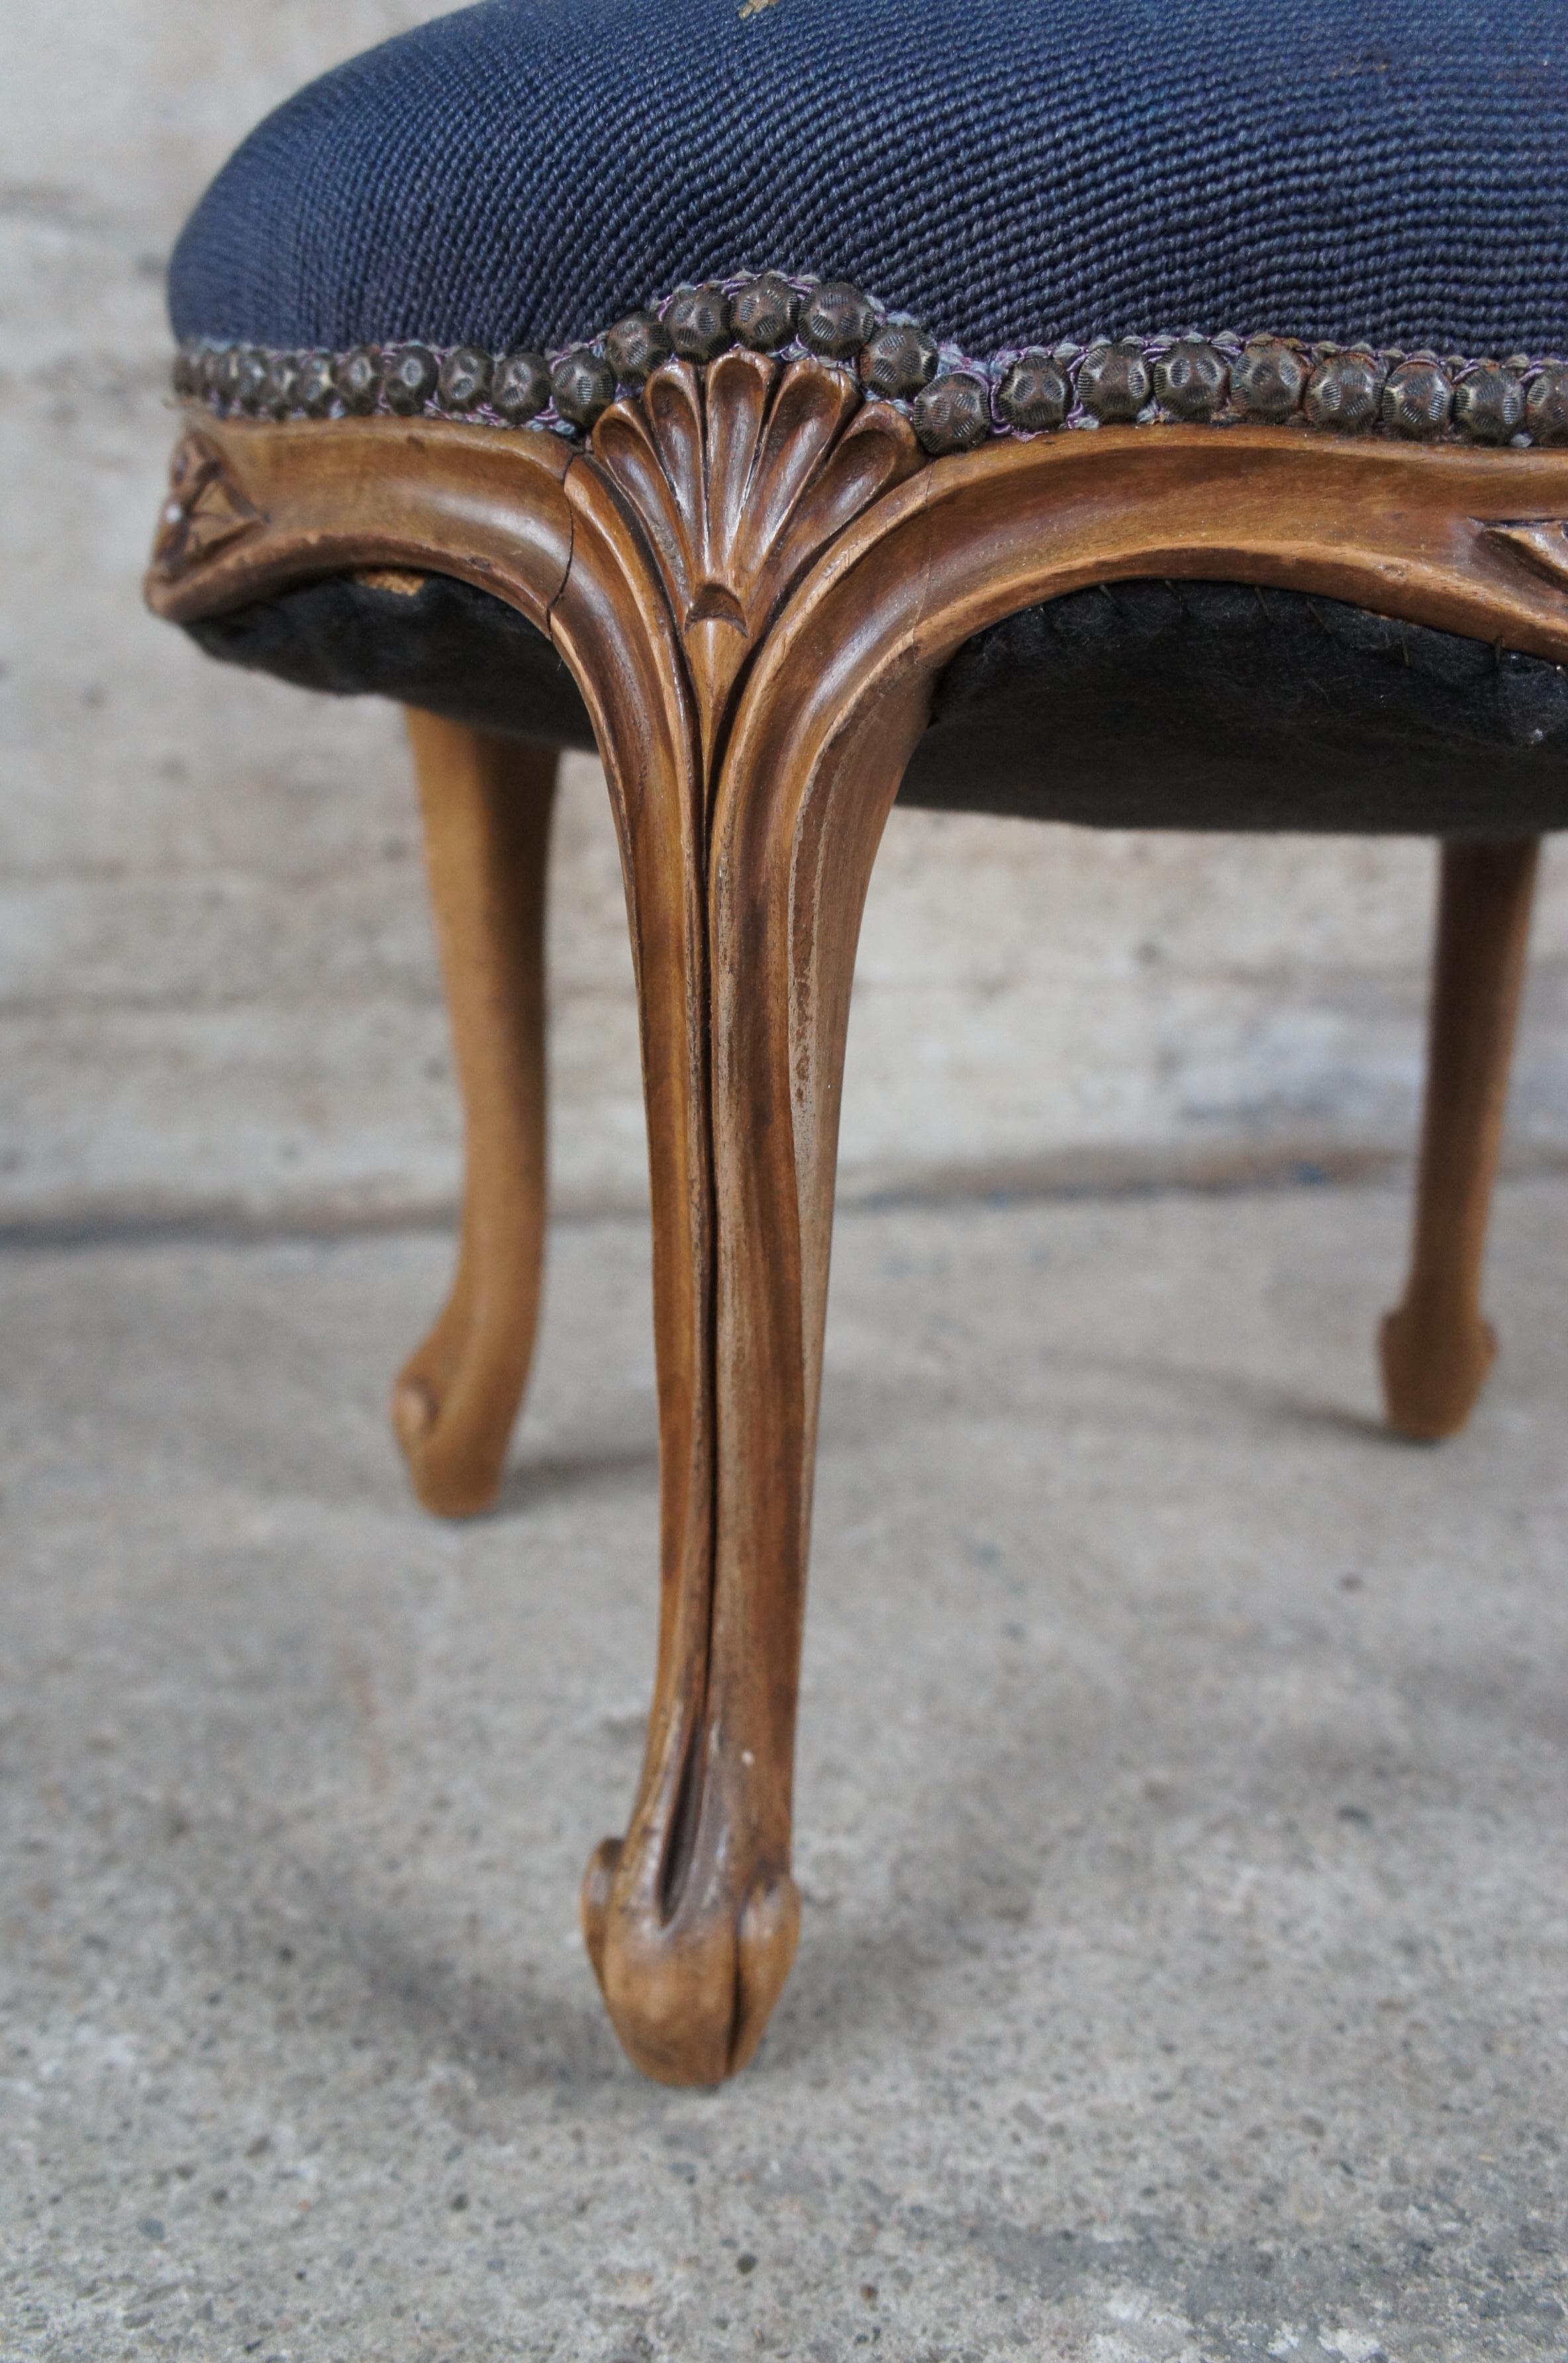 Antique French Provincial Walnut Needlepoint Stool Foot Rest Ottoman Seat 1